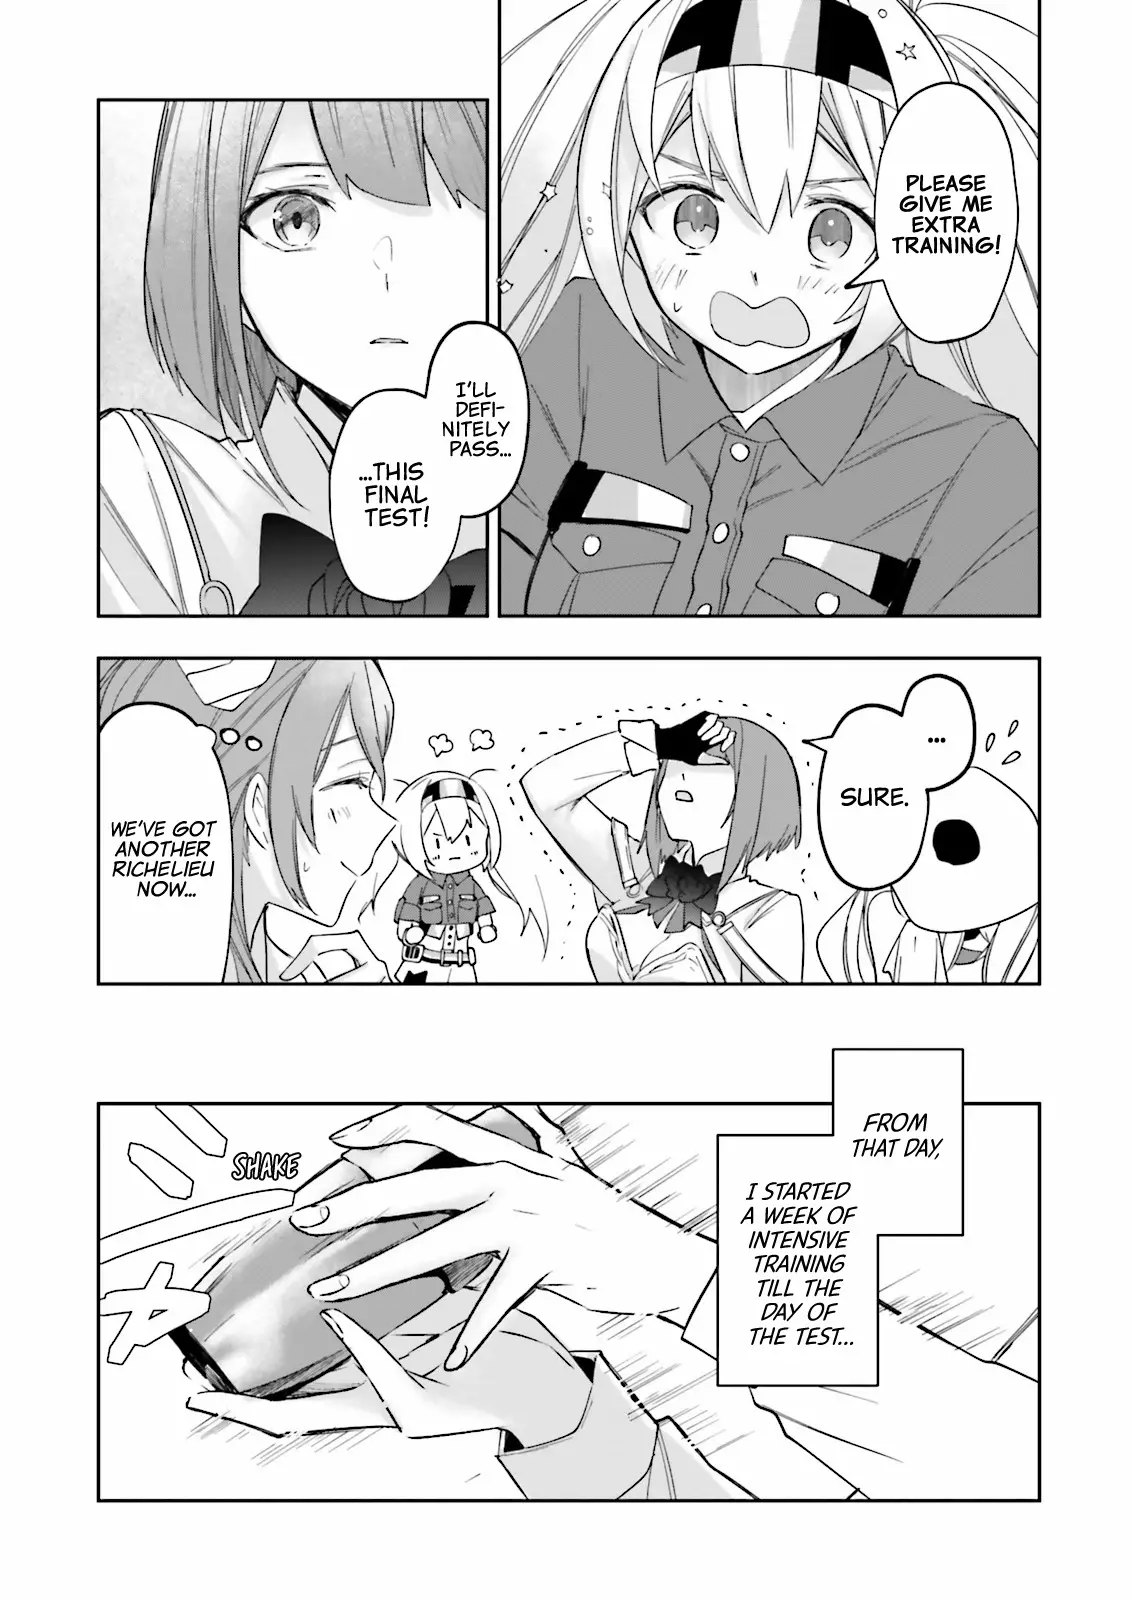 Kantai Collection -Kancolle- Tonight, Another "salute"! - 24 page 16-f2d966ba